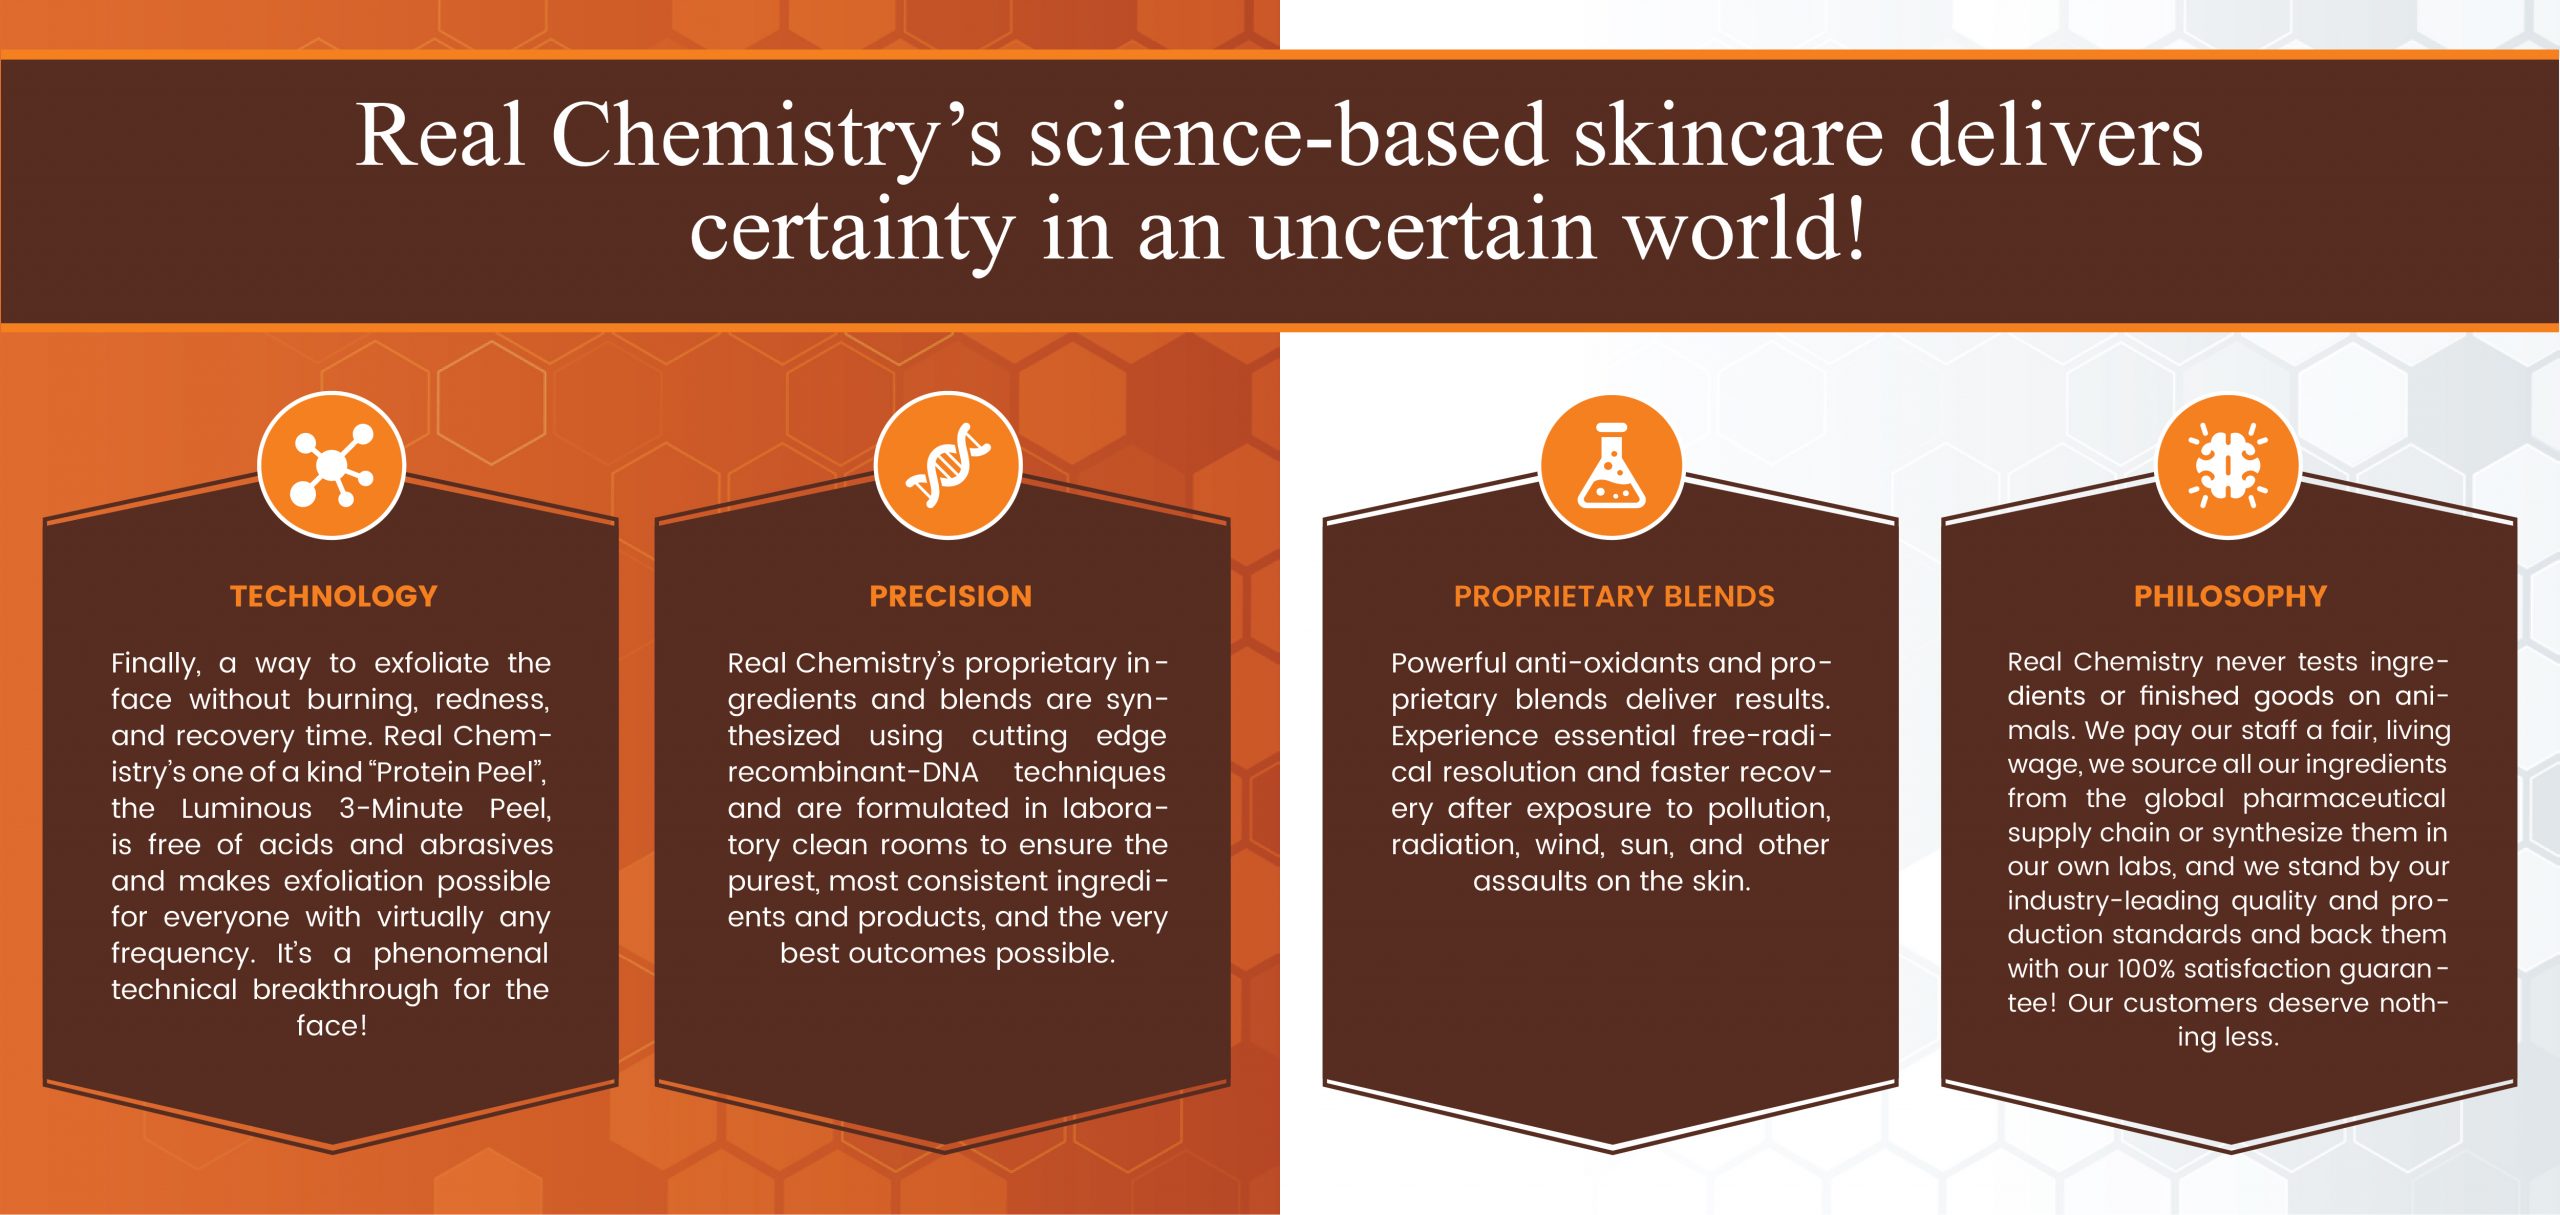 Real-chemistry-your-science-based-skin-care-03-scaled